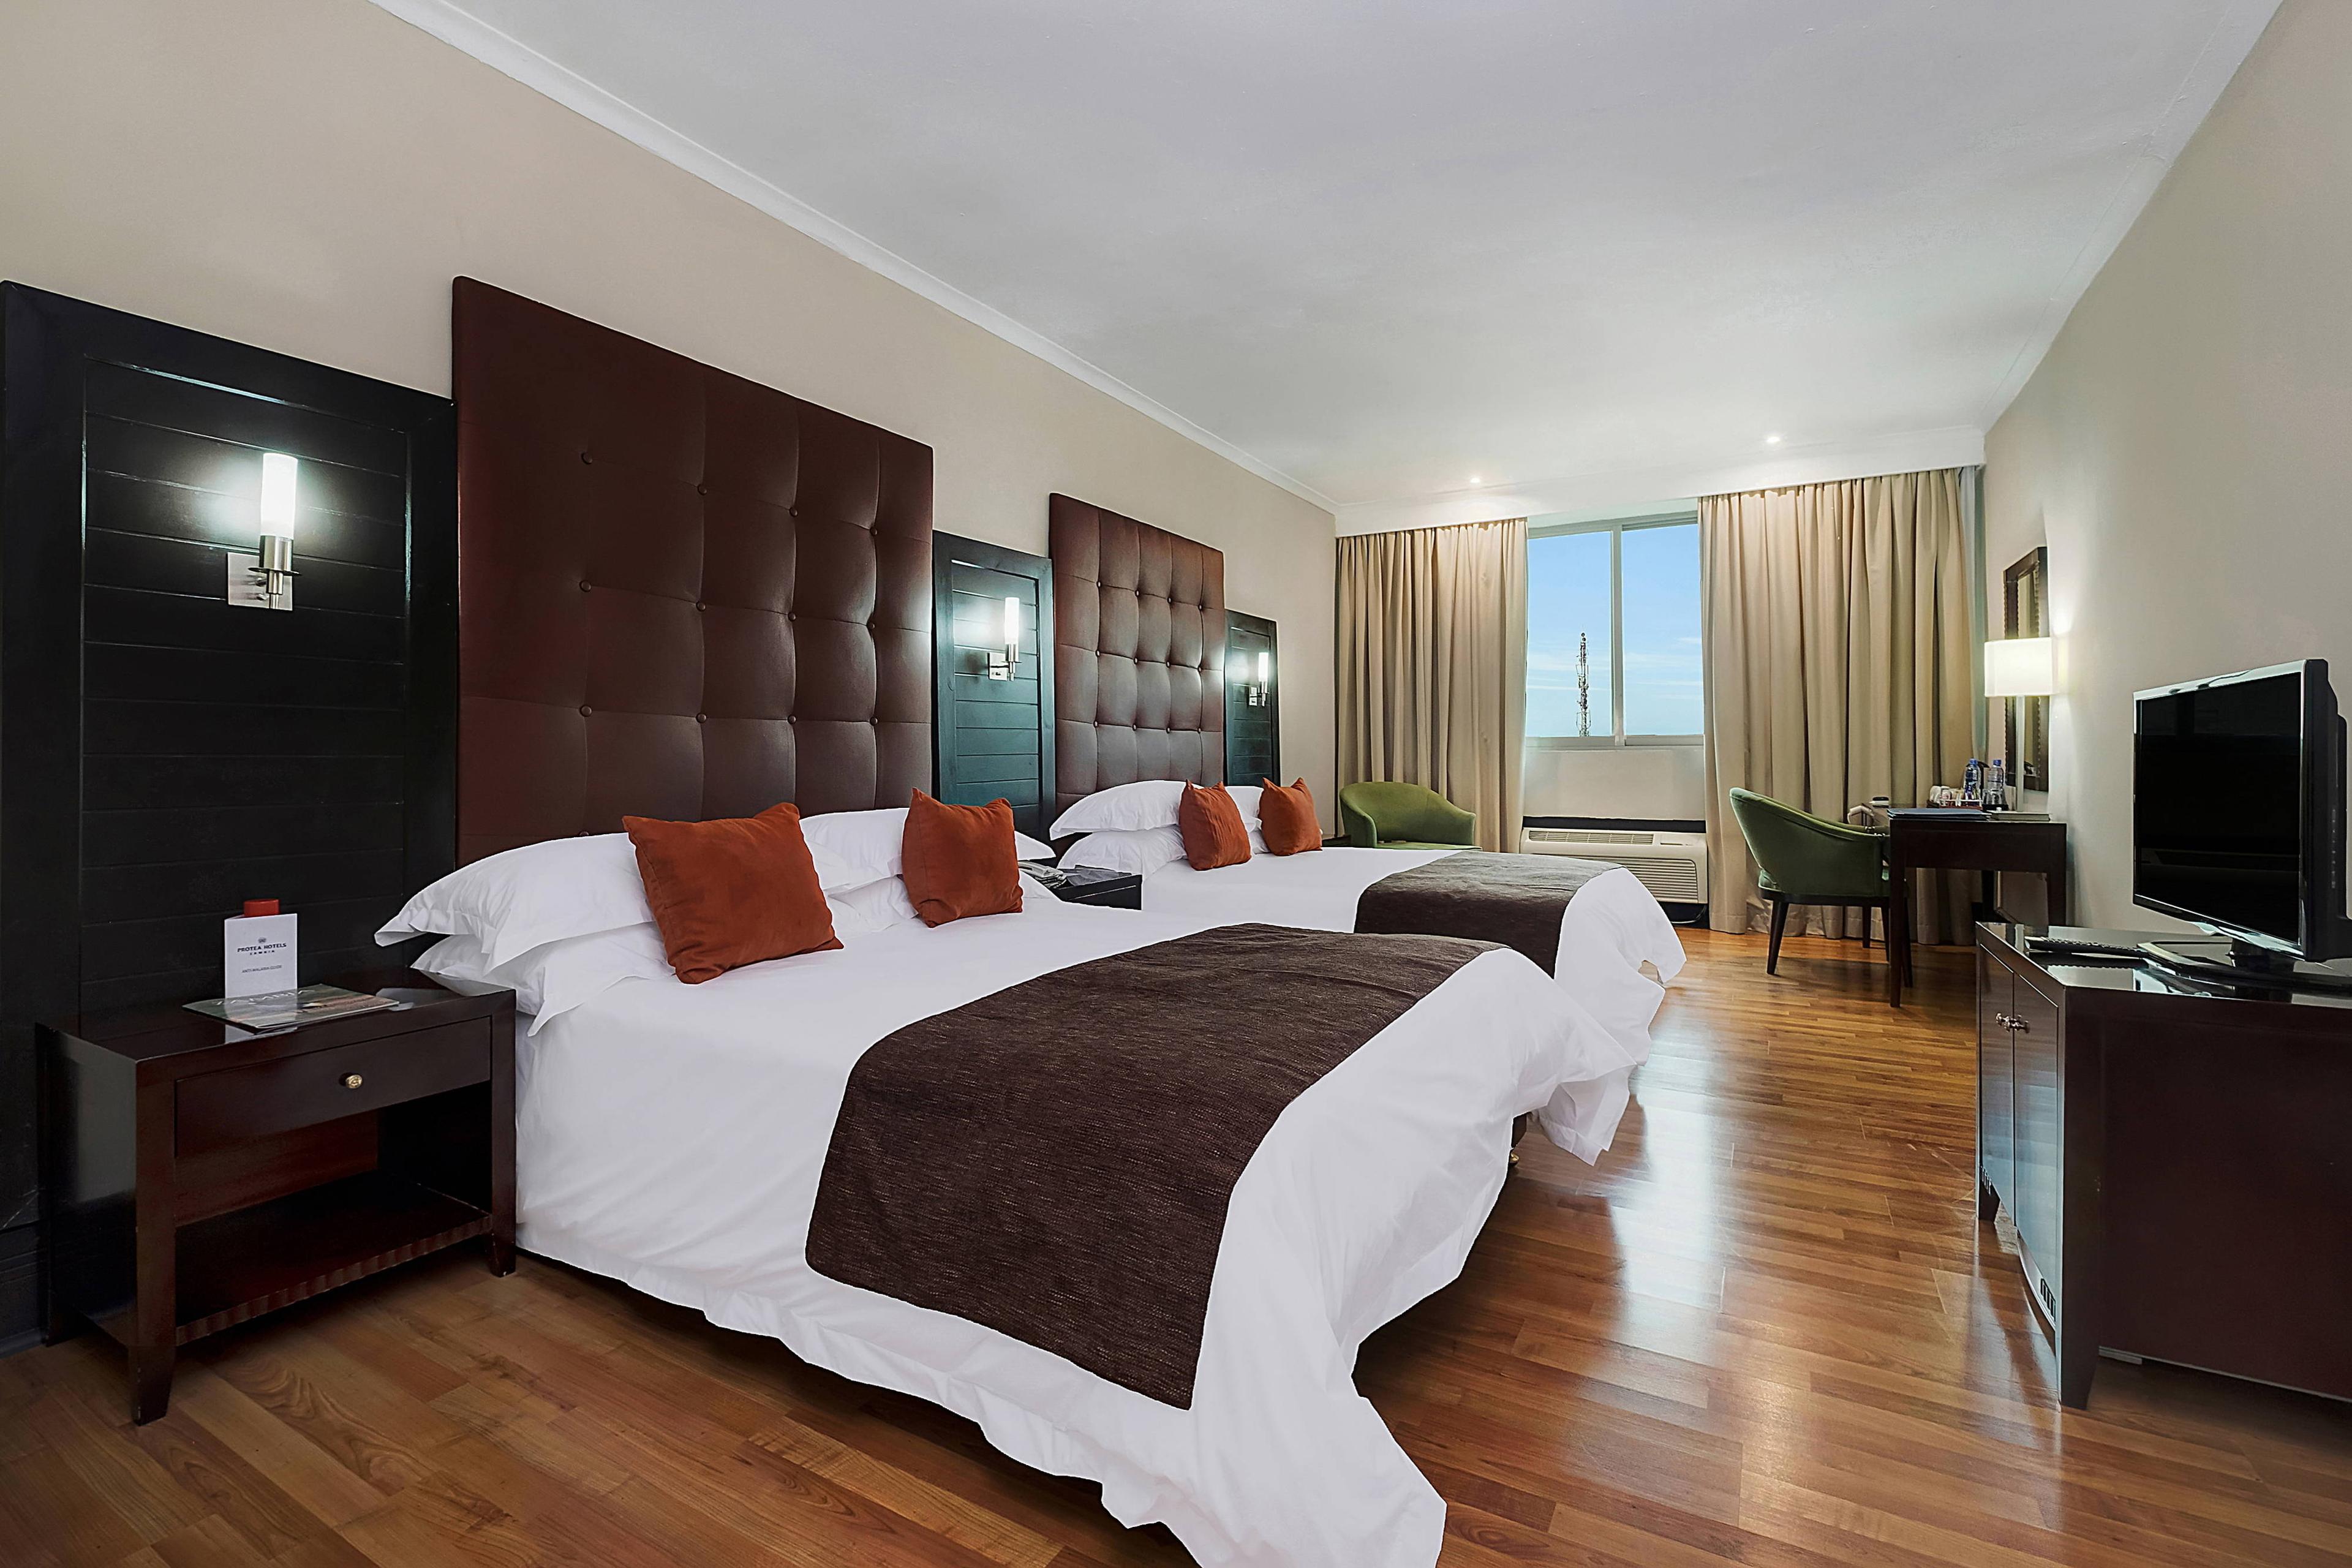 Our queen/queen guest rooms are ideal for business, group and leisure travelers.